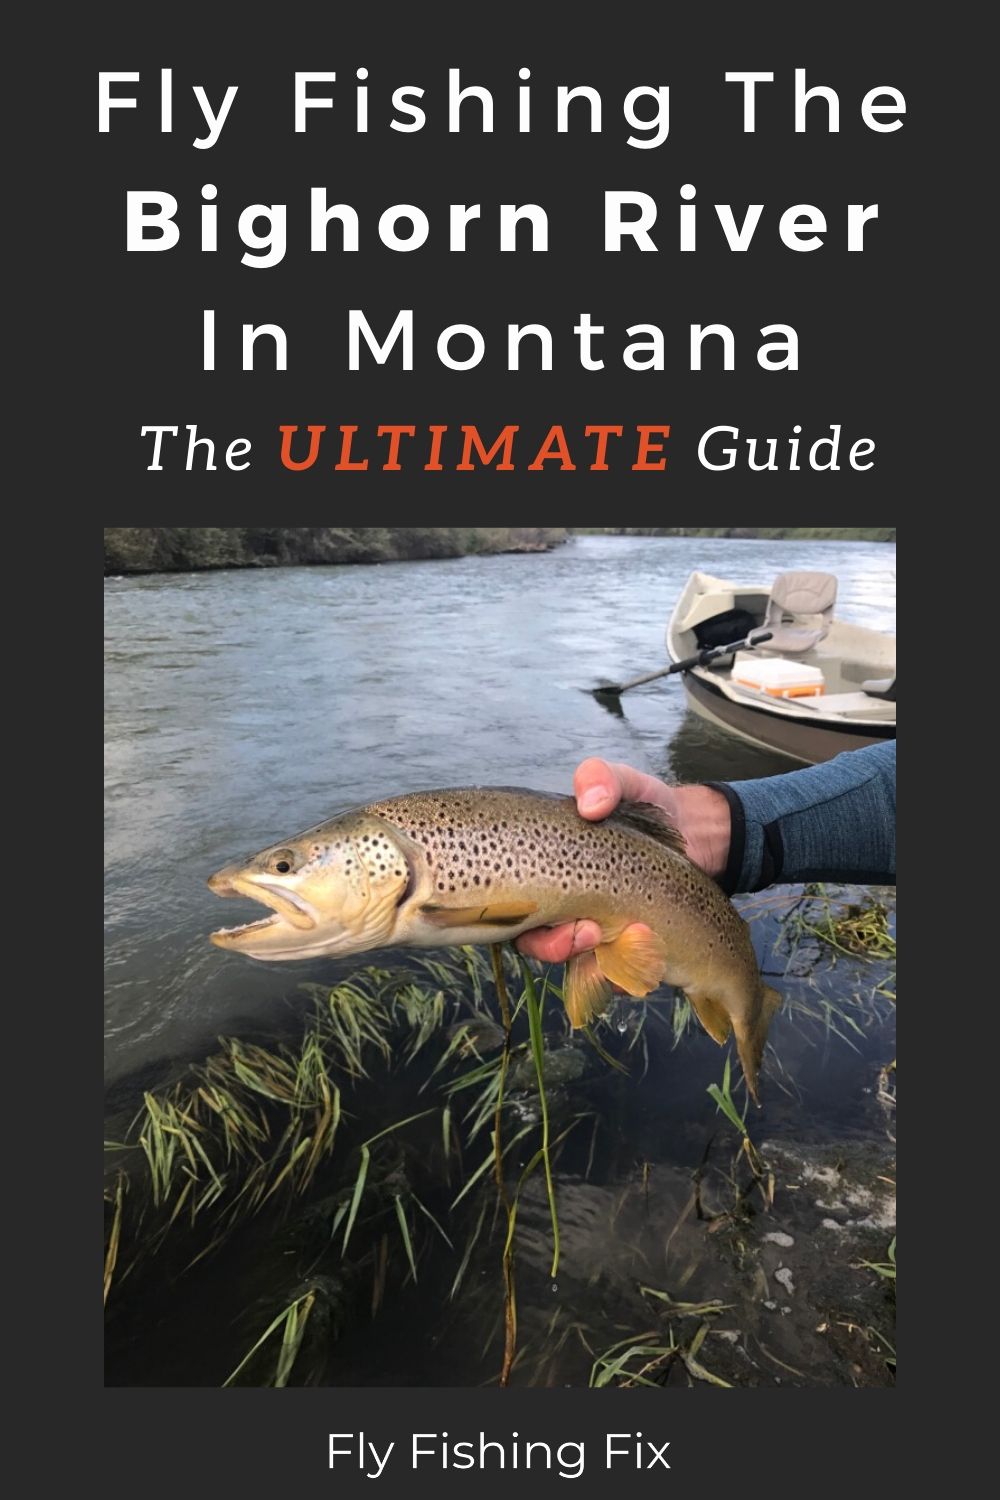 Fishing The Bighorn River In Montana: The Ultimate Guide - Fly